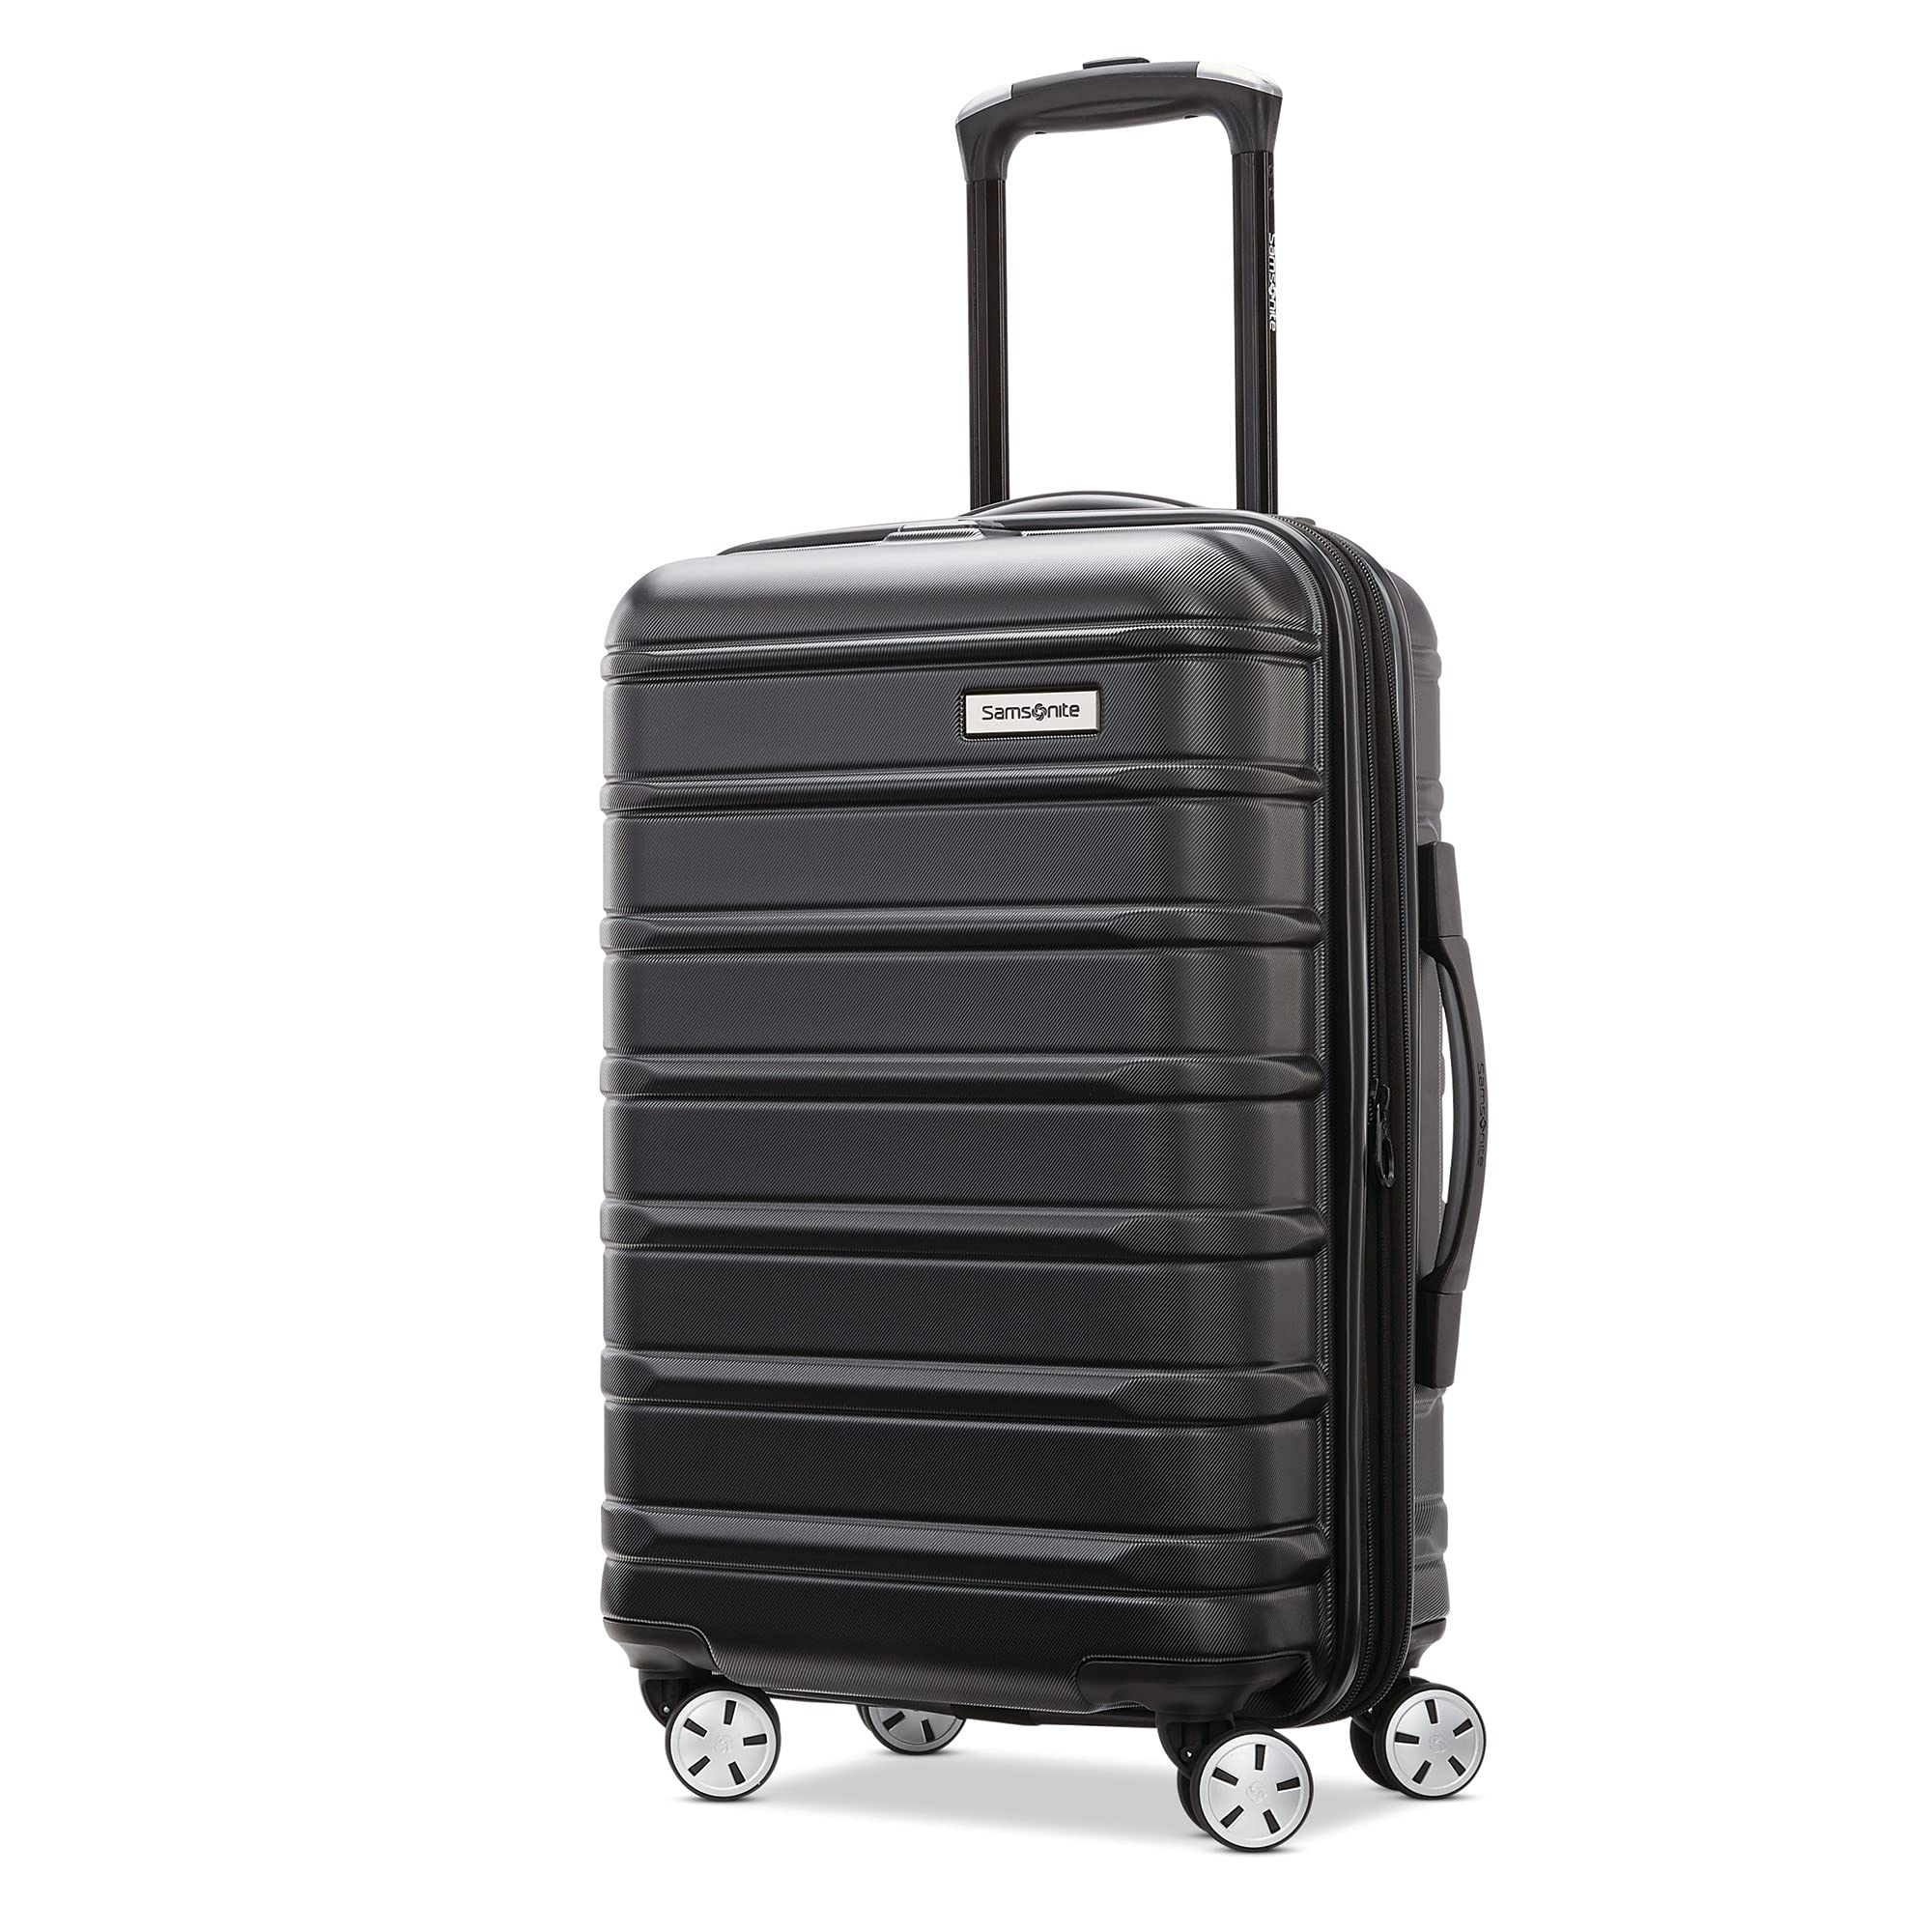 Samsonite Omni 2 Hardside Expandable Luggage with Spinner Wheels, Carry-On 20-Inch, Midnight Black $87.13